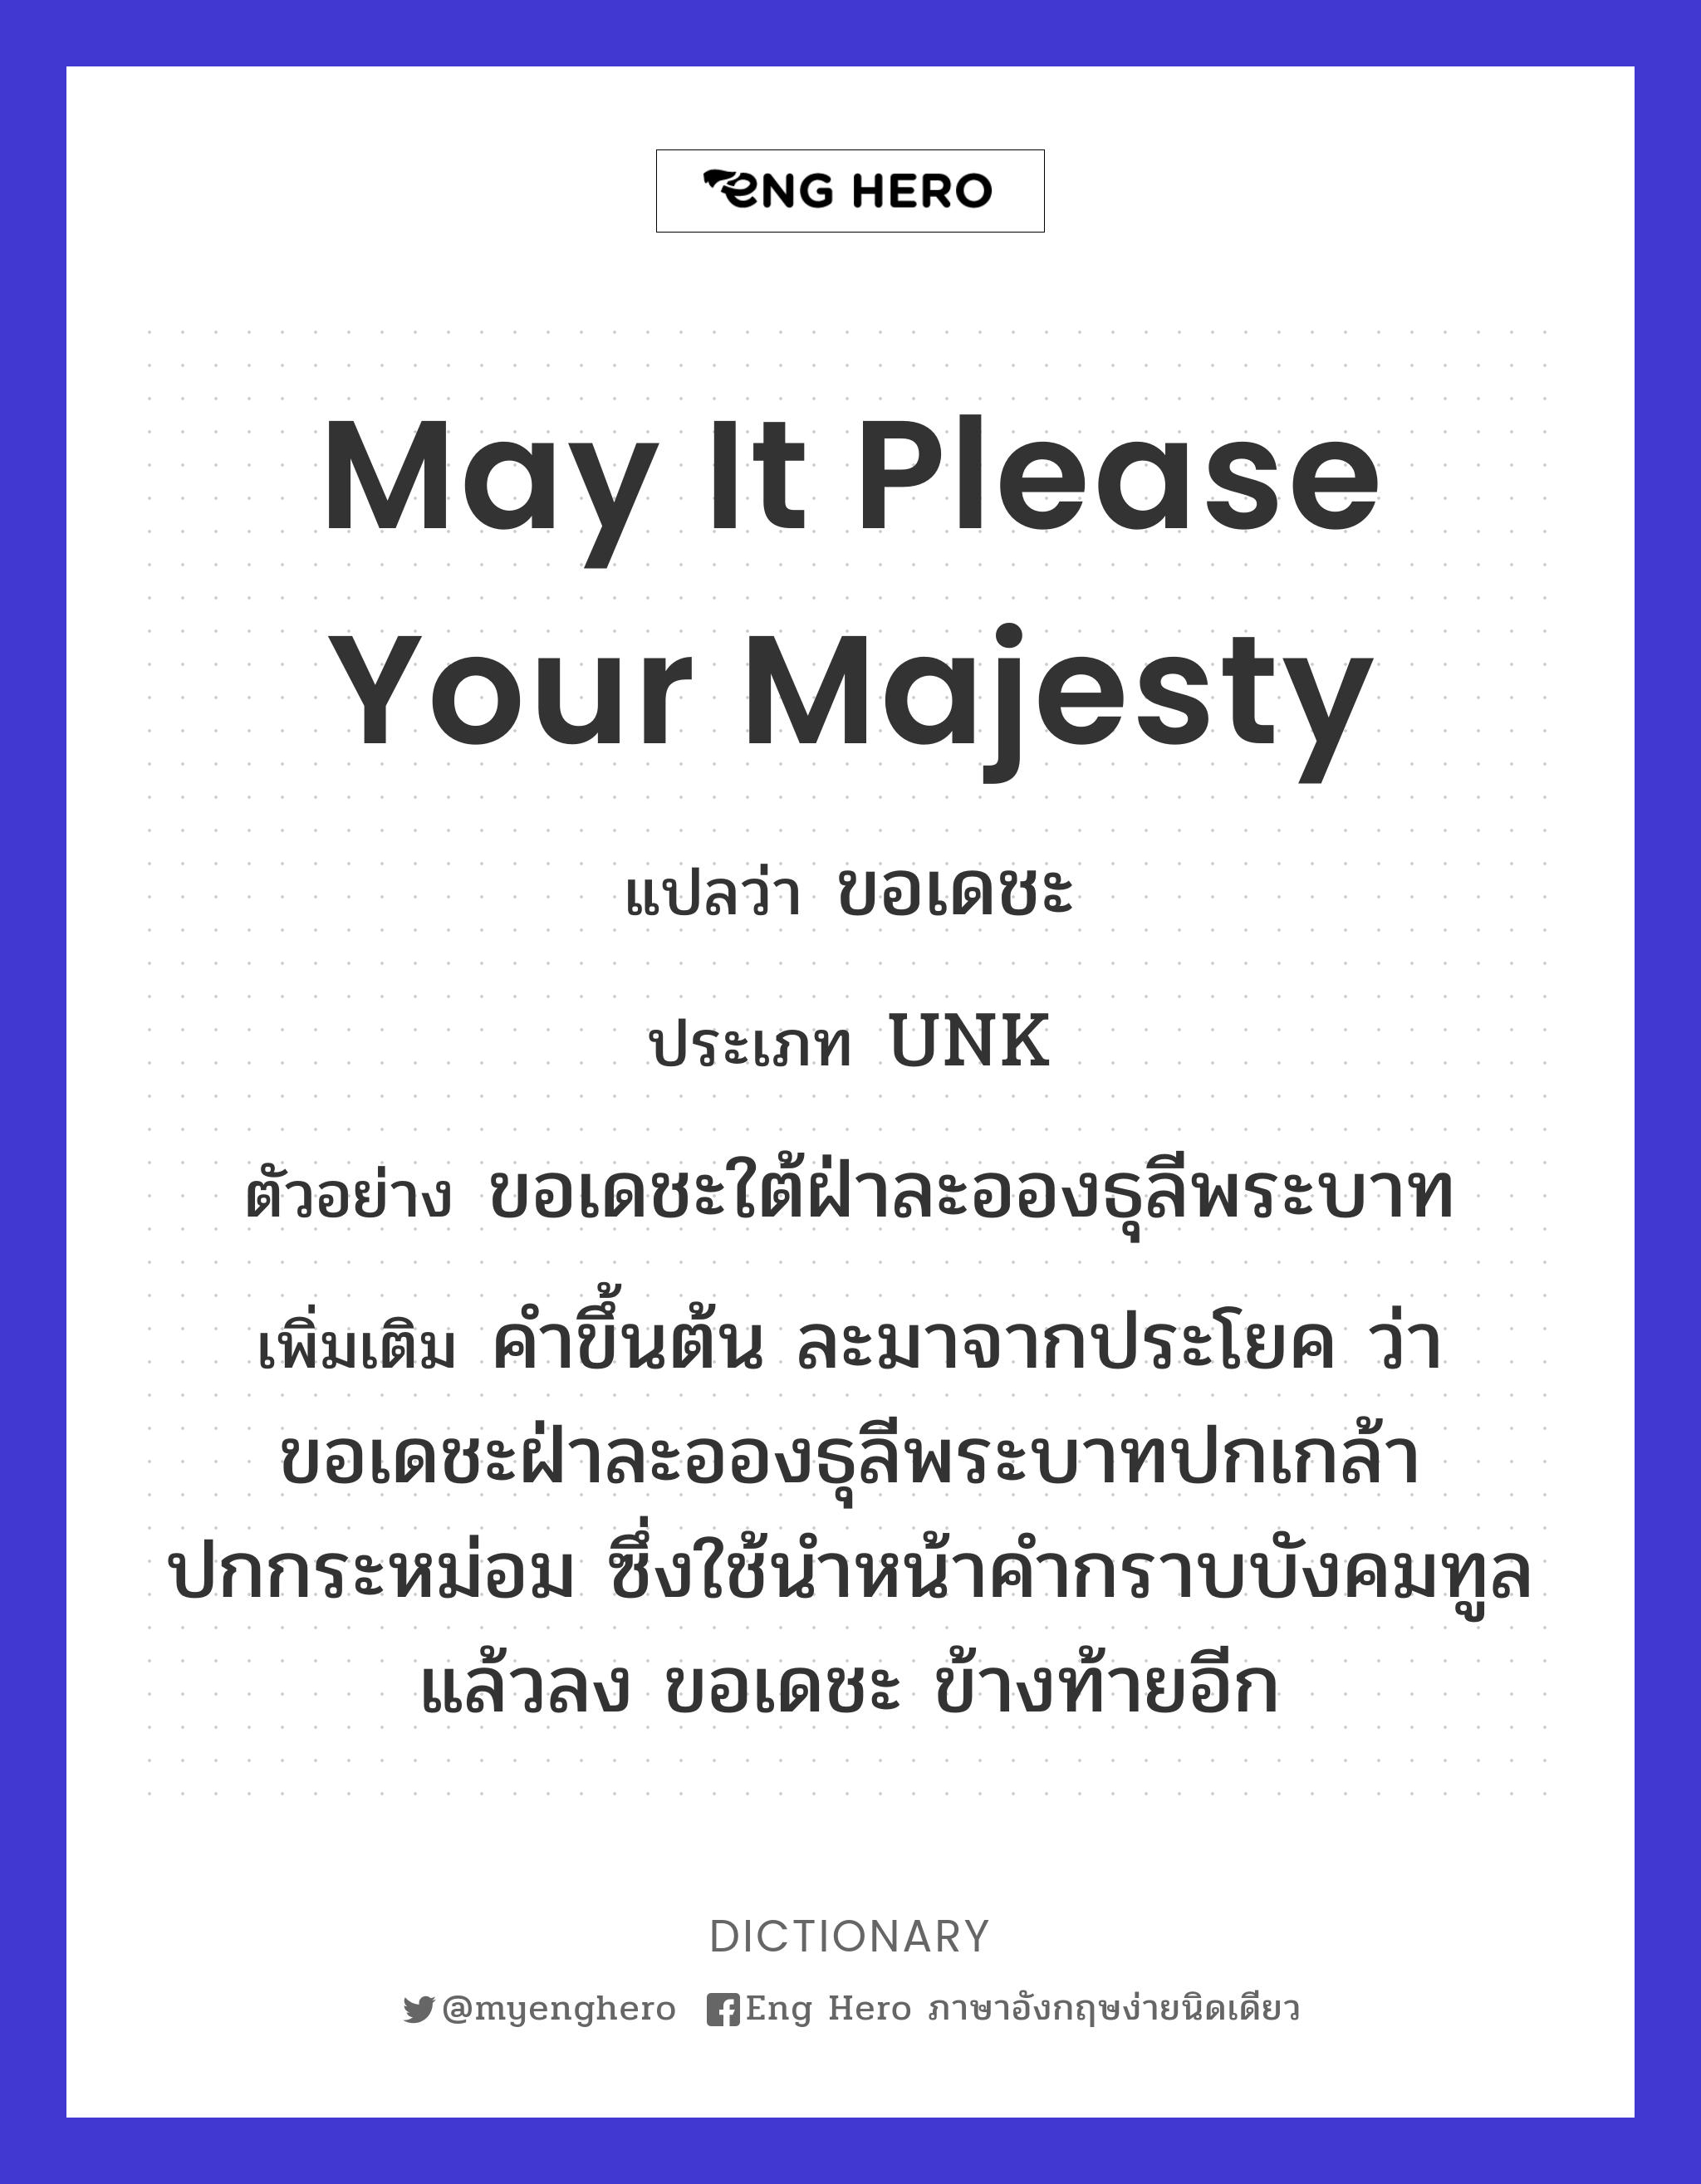 May it please Your Majesty